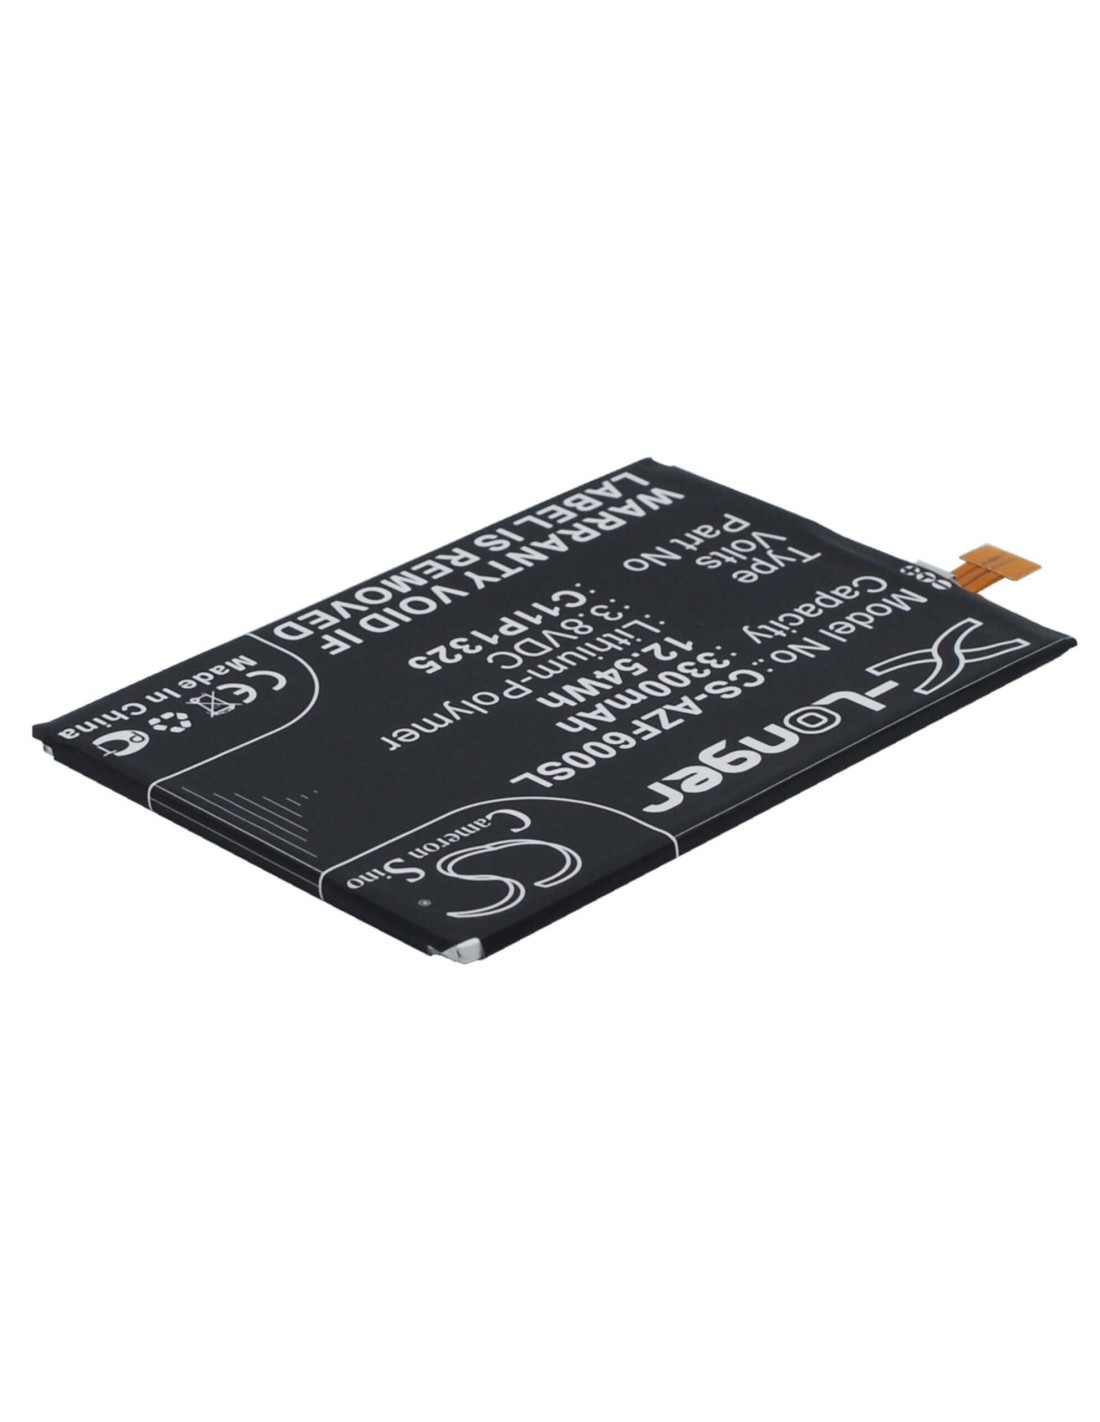 Battery for Asus ZenFone 6, A600, A600CG 3.8V, 3300mAh - 12.54Wh